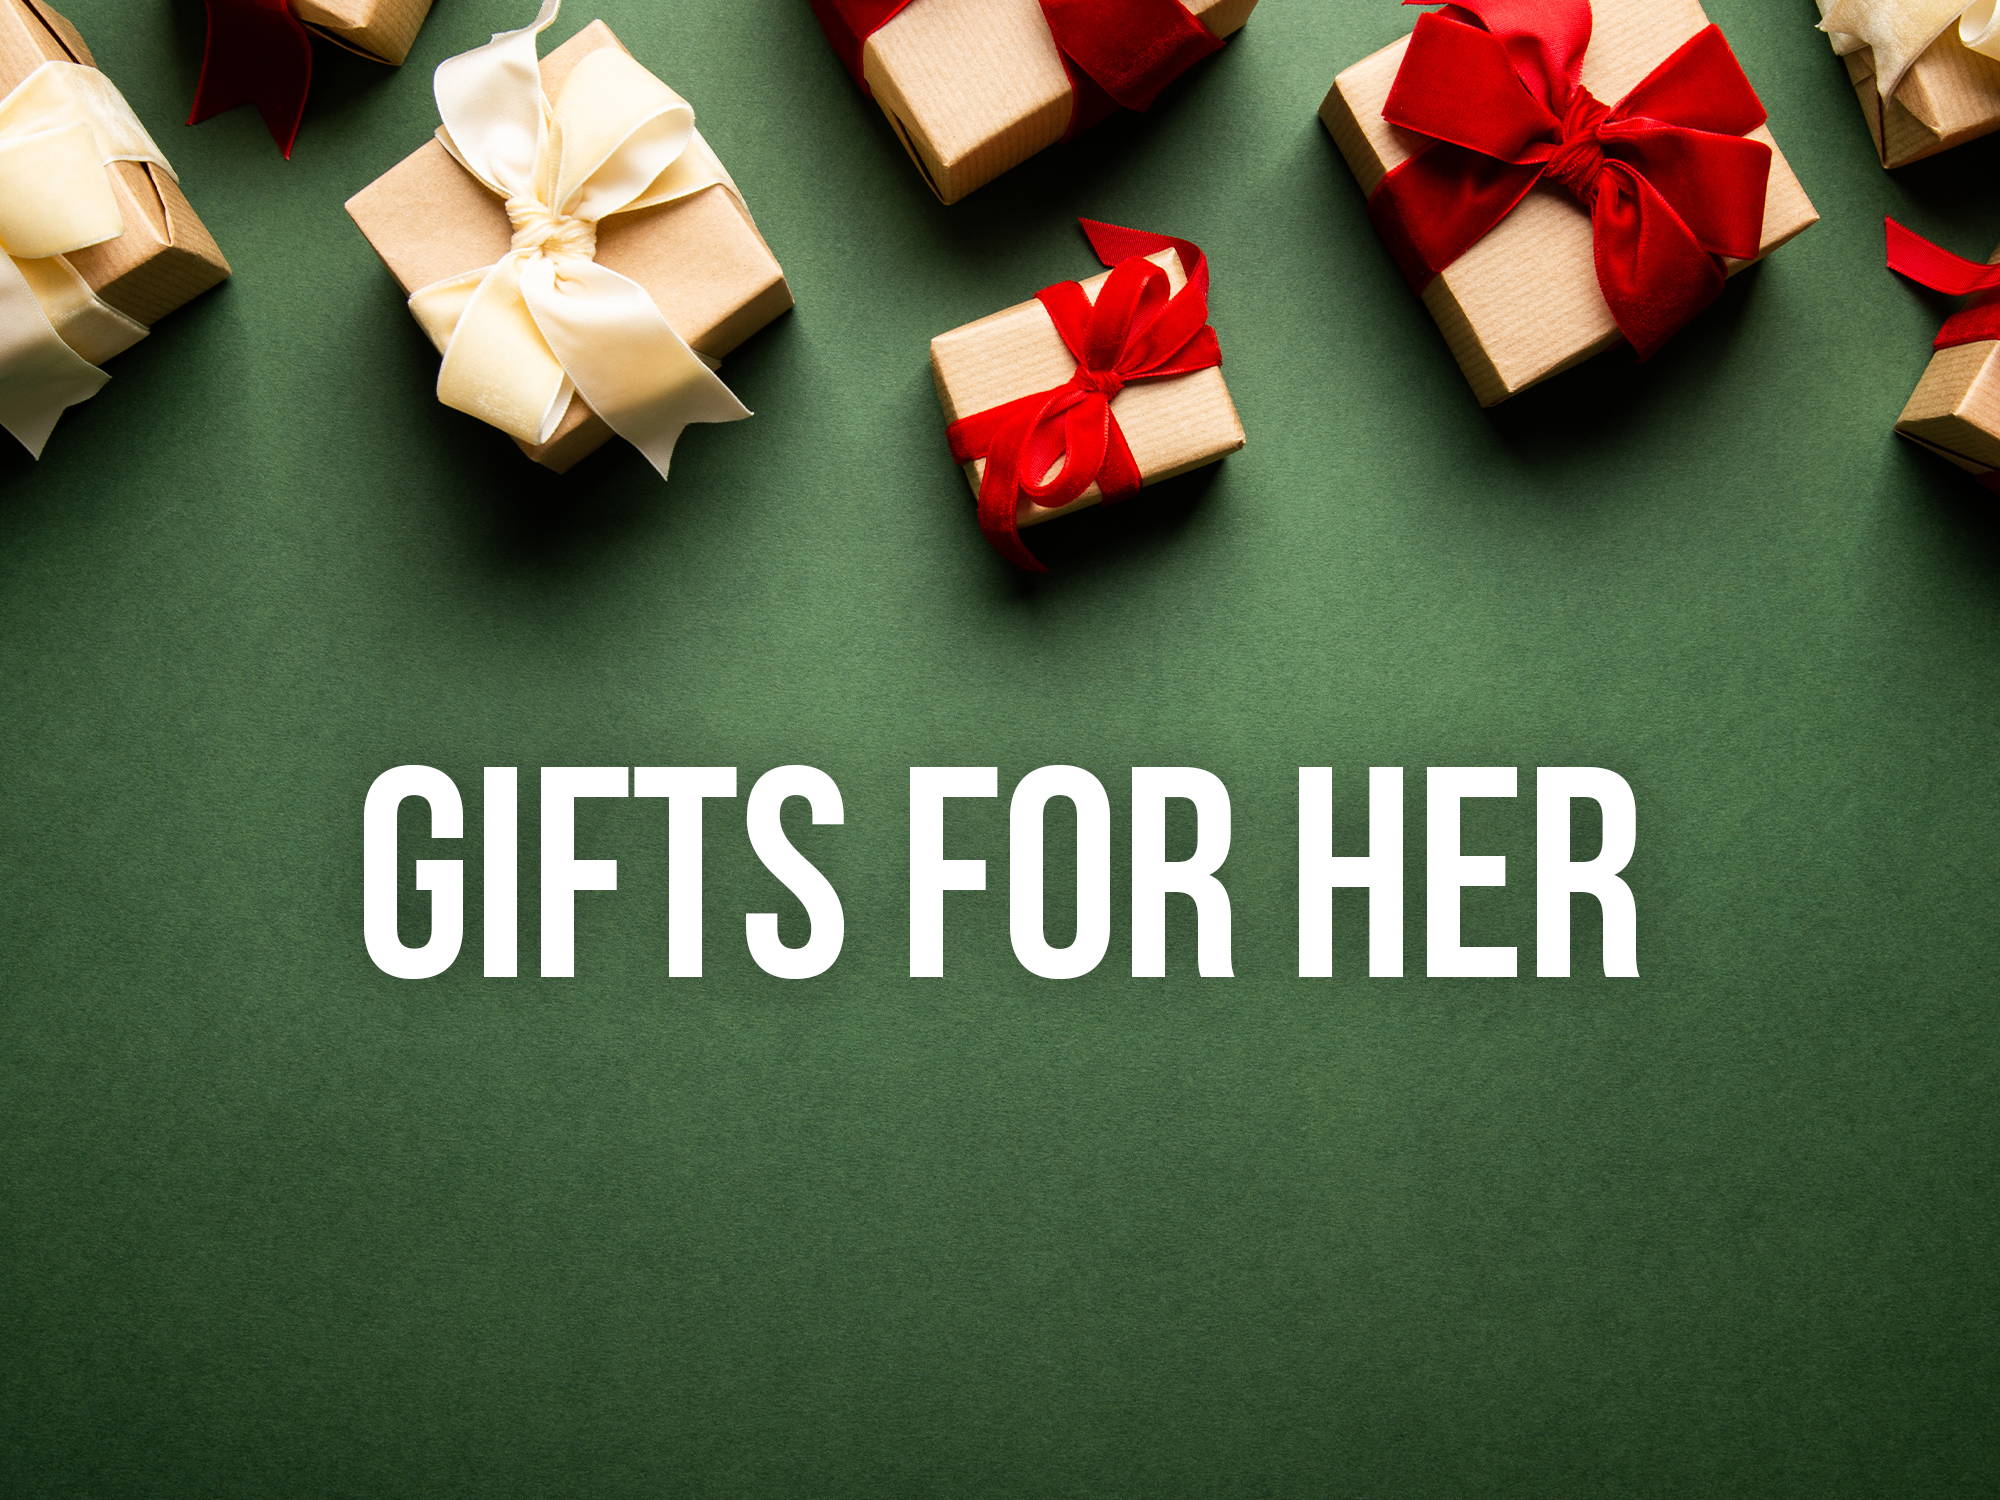 Gifts For Her collection